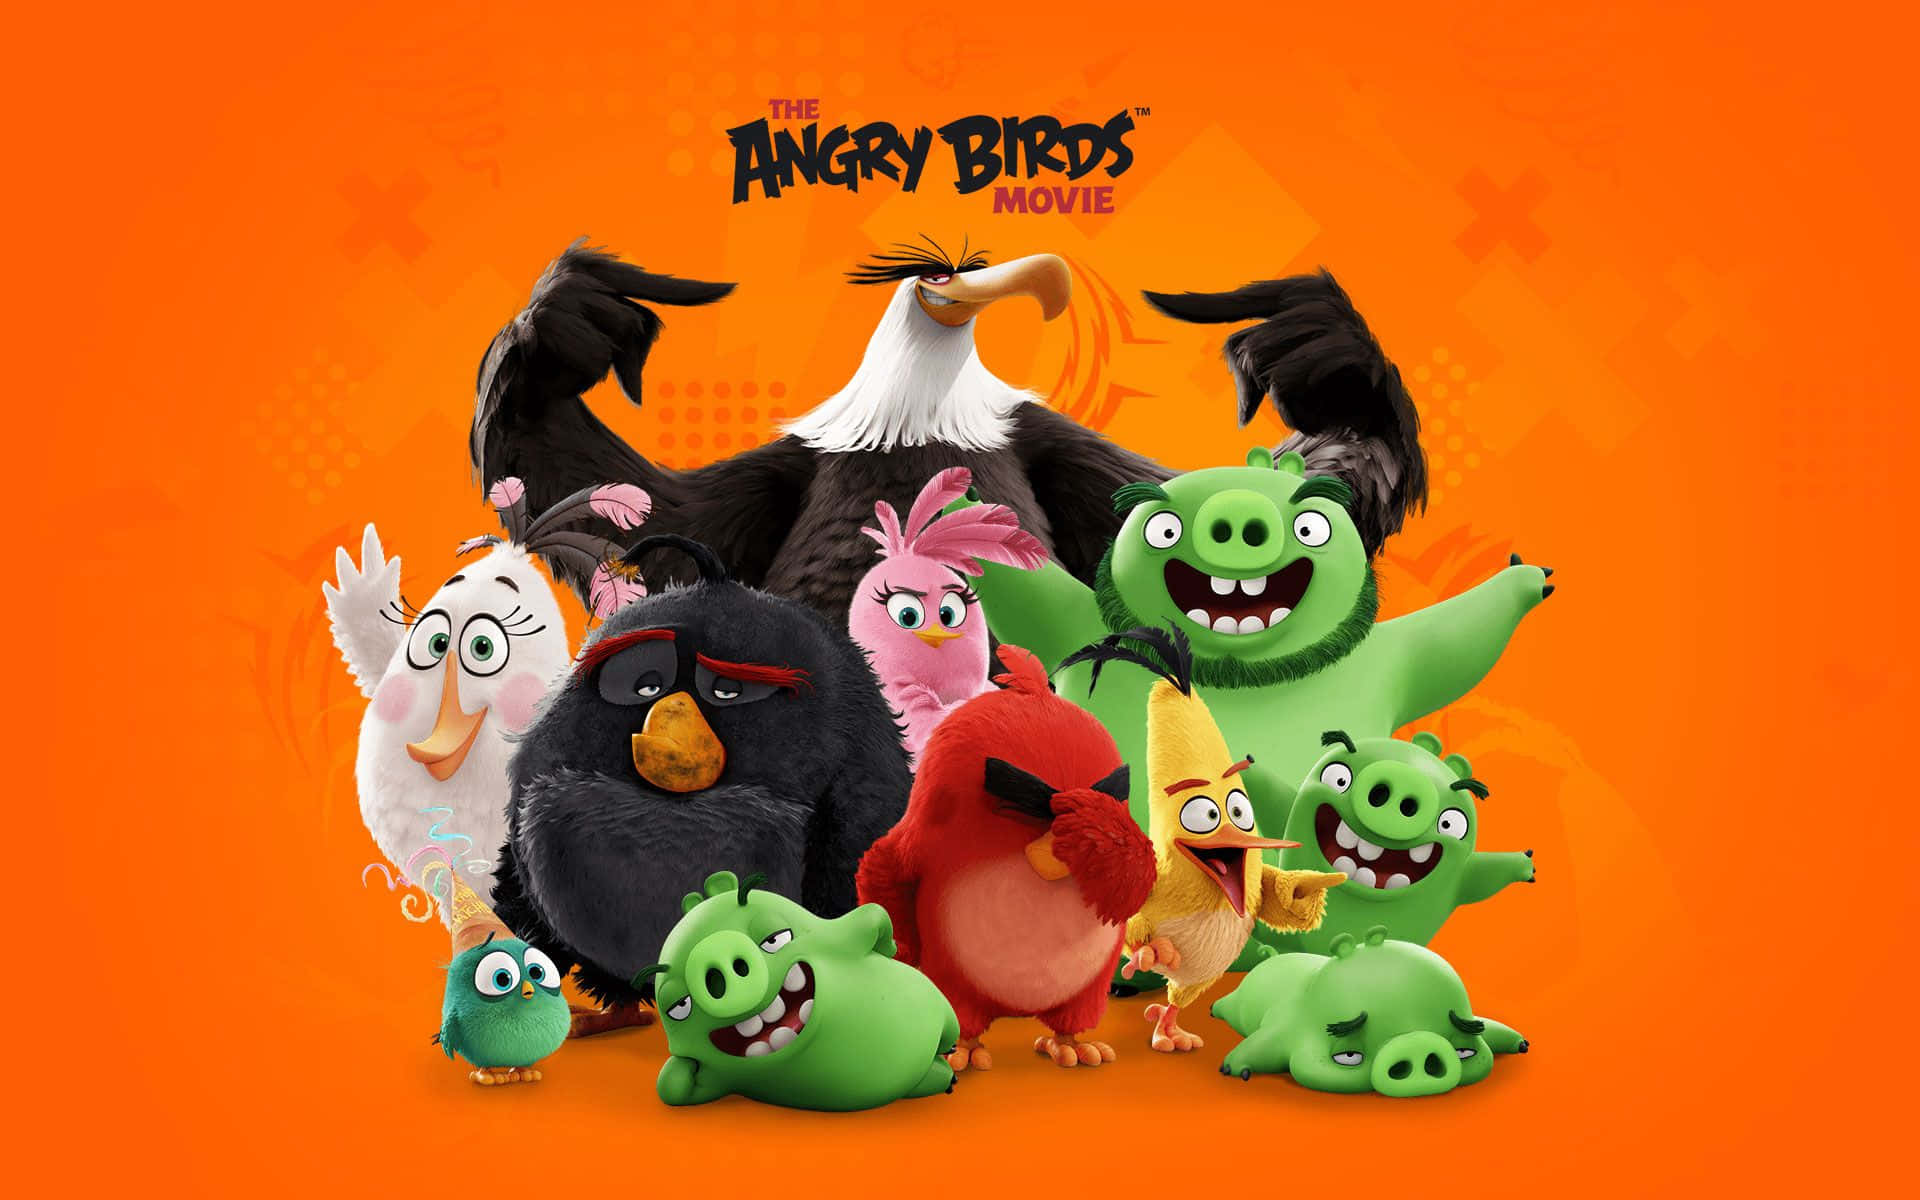 Get ready for the ultimate Angry Birds experience